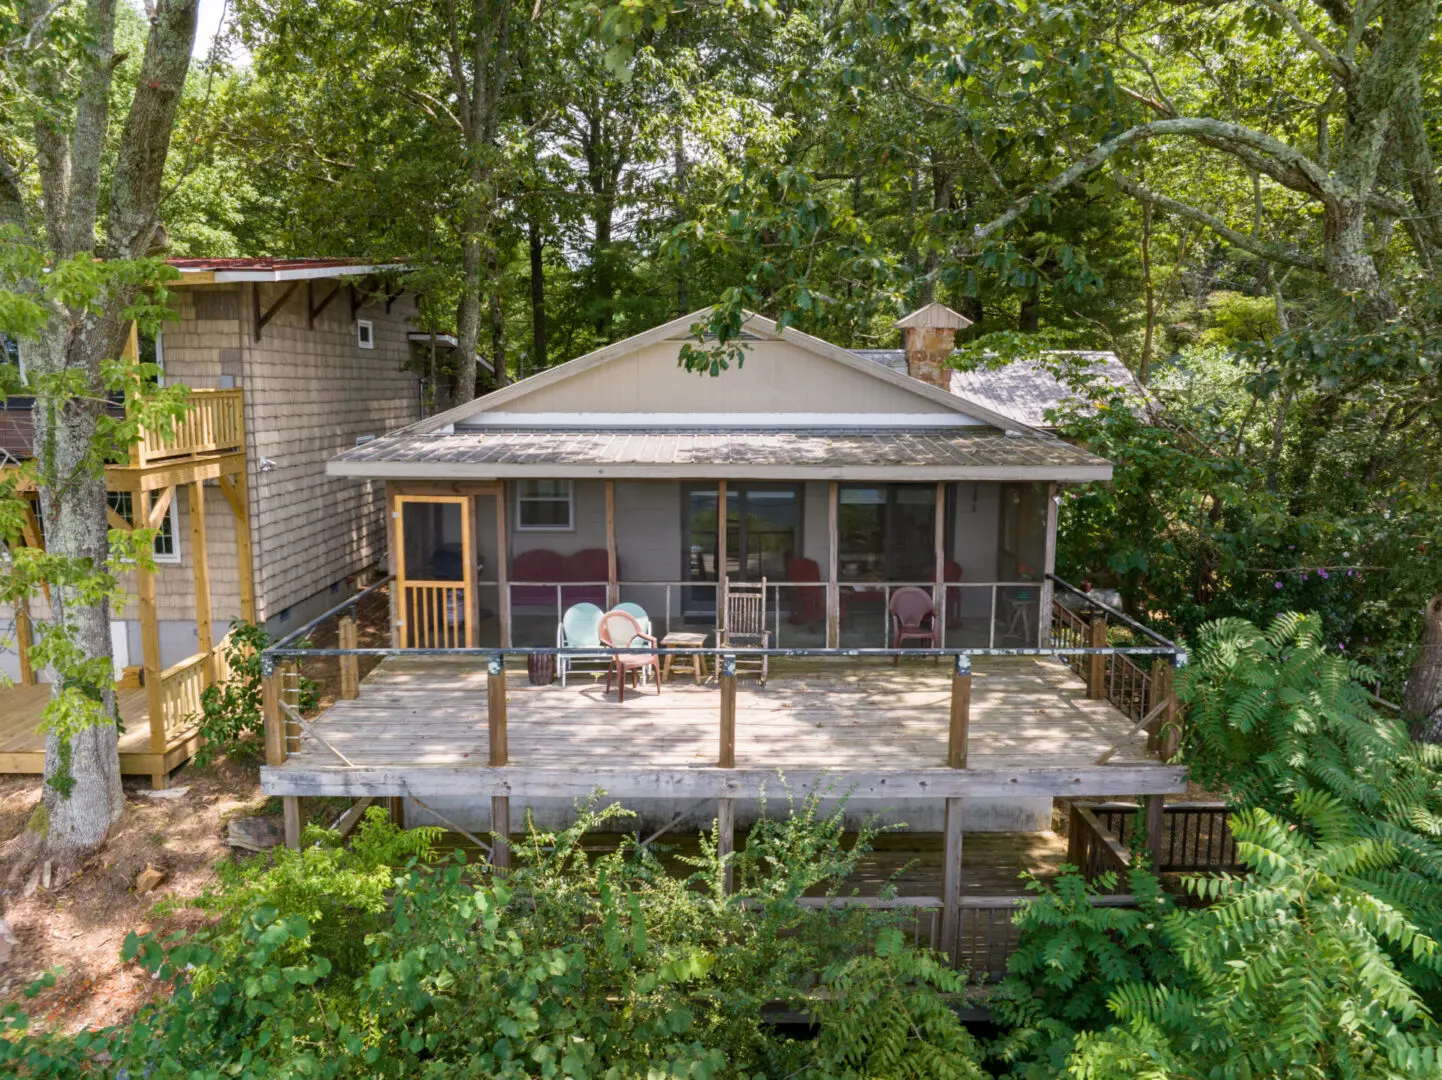 A breathtaking aerial view of a secluded cabin nestled among the lush woods of Mentone.